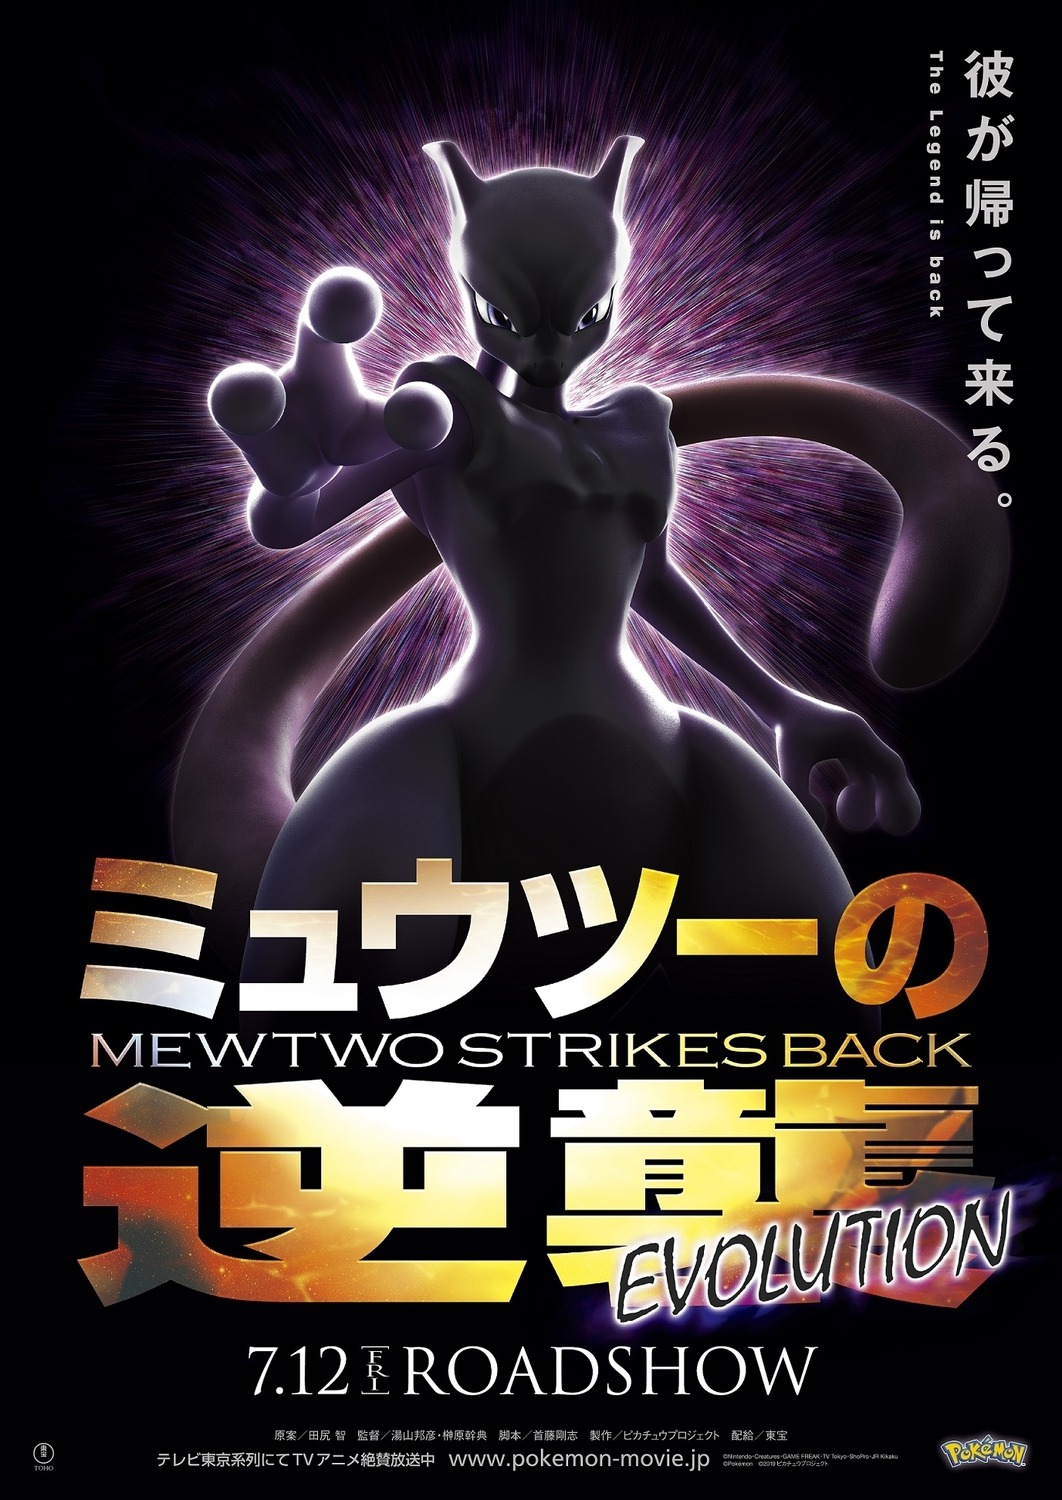 Extra Large Movie Poster Image for Pokemon the Movie: Mewtwo Strikes Back Evolution (#1 of 2)